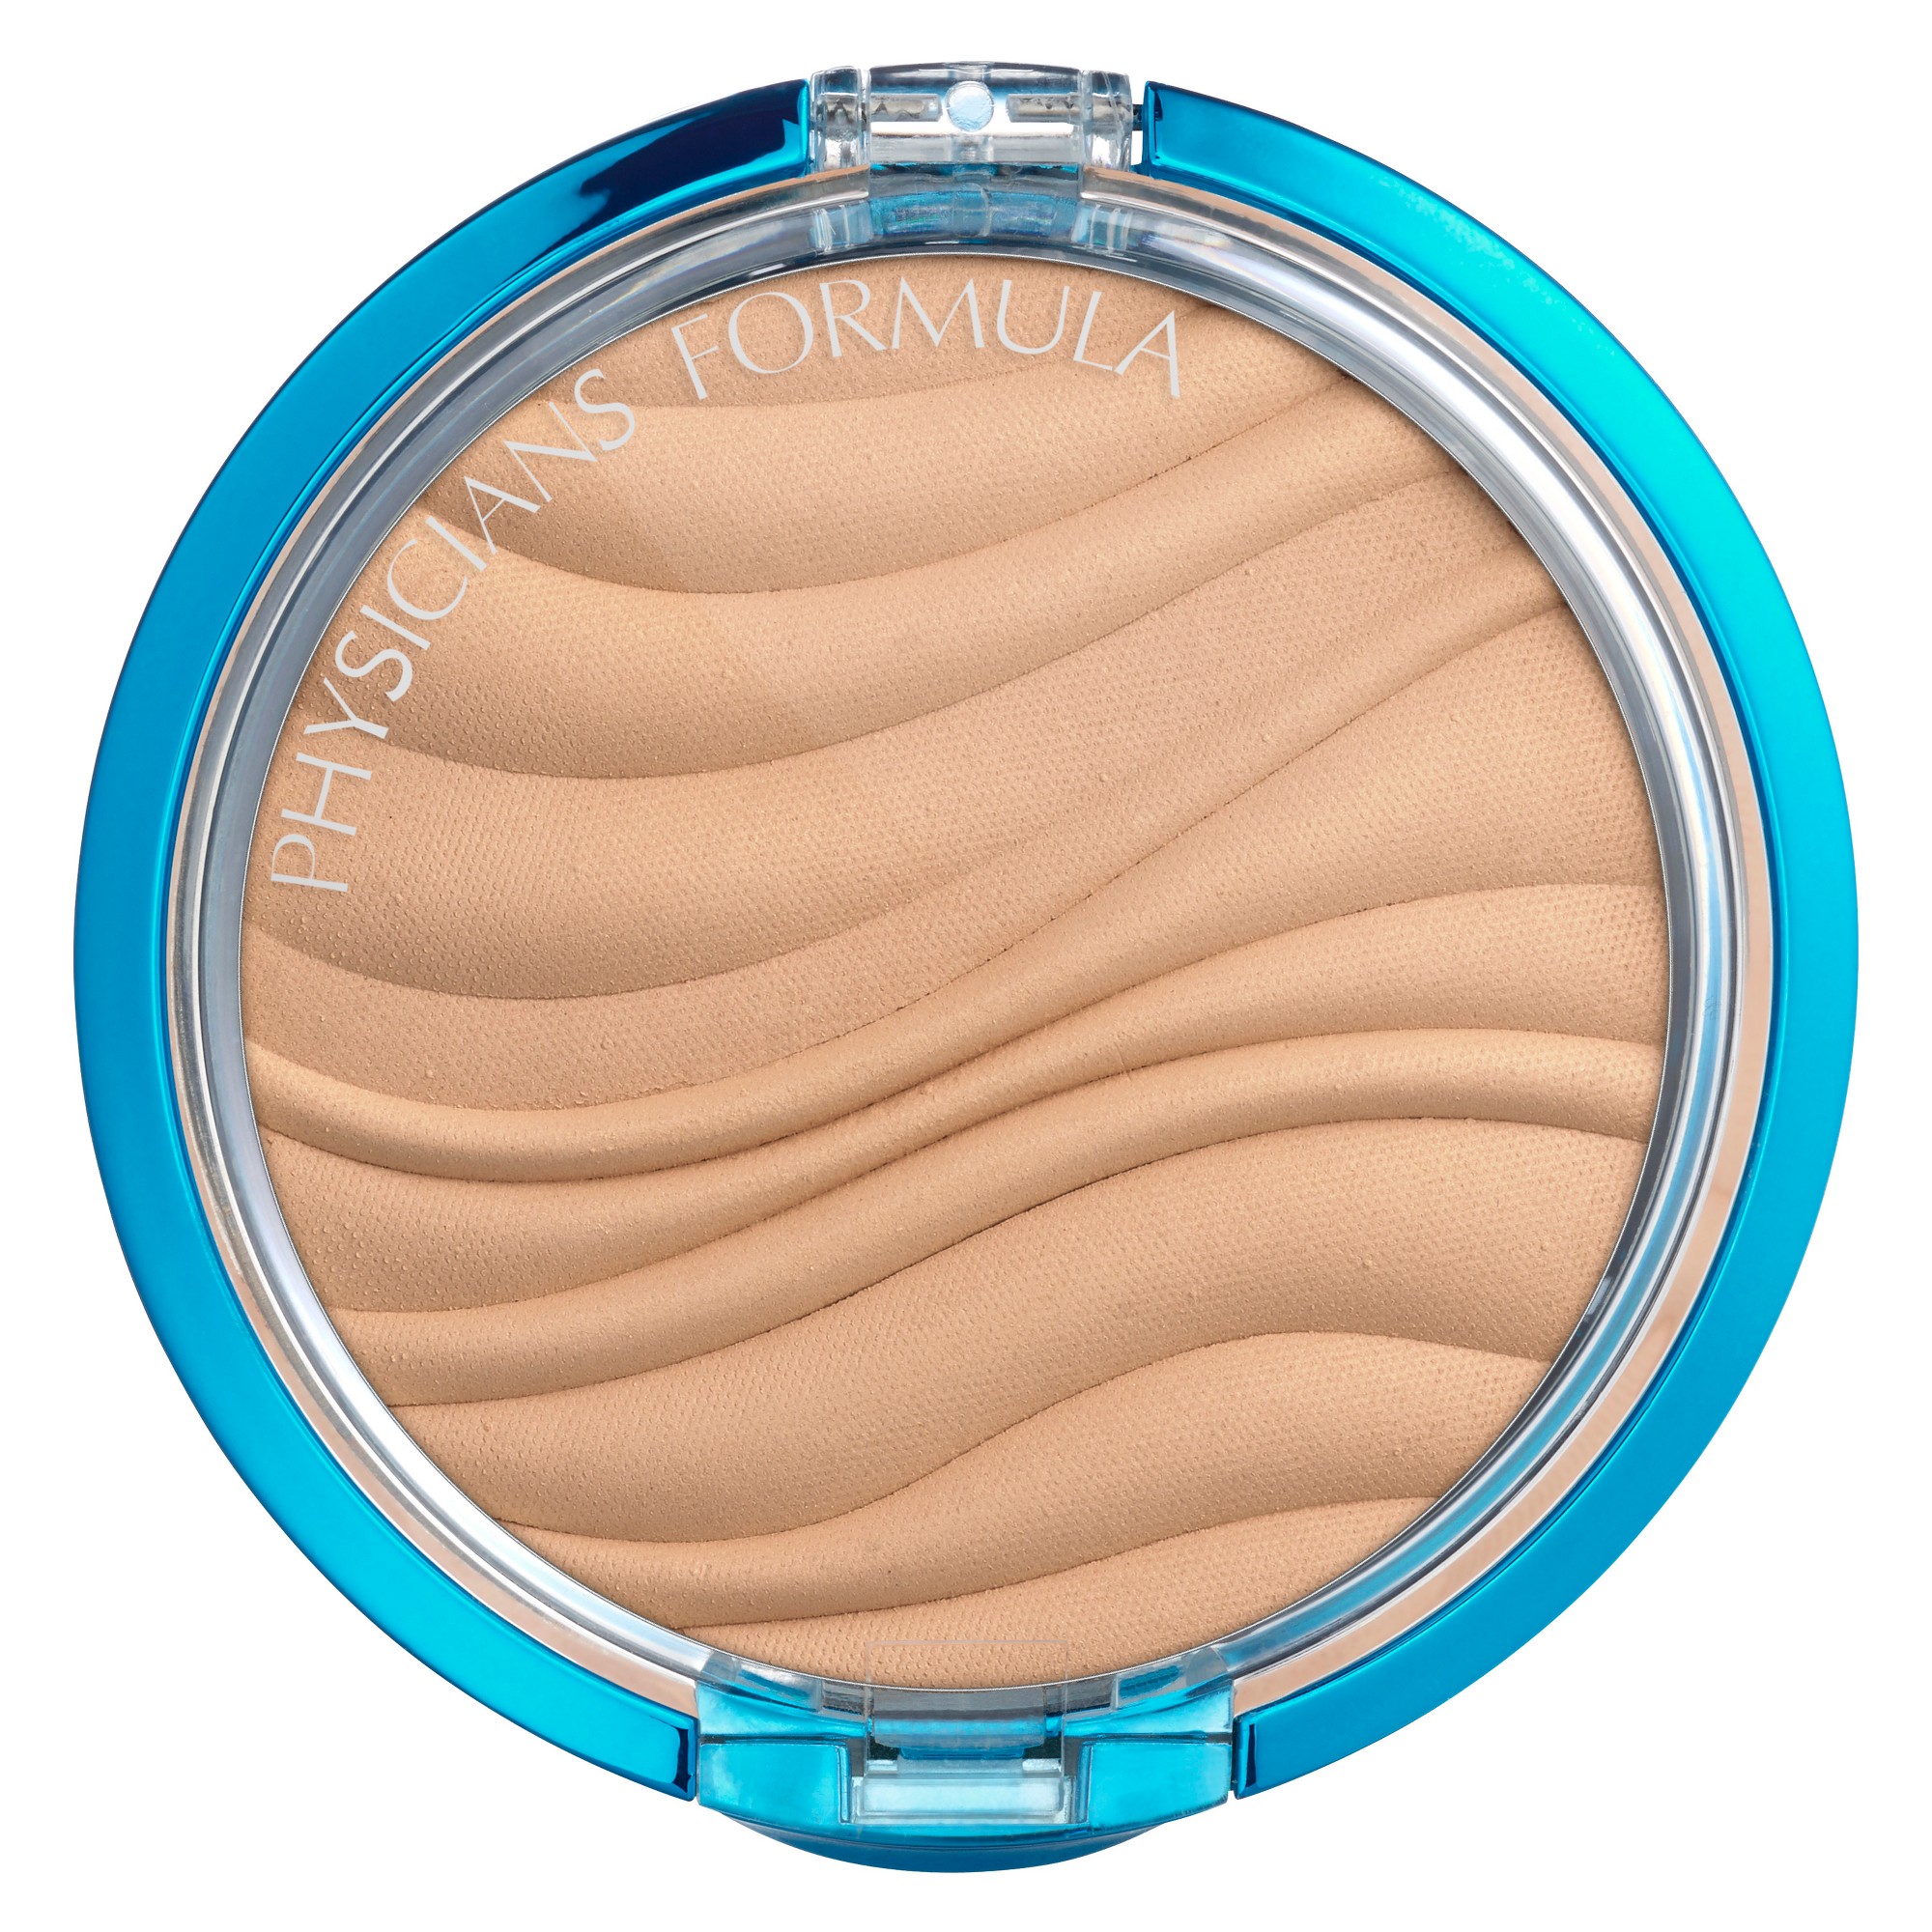 Physicians Formula Mineral Wear Talc-Free Mineral Airbrushing Pressed Powder SPF 30 - Translucent